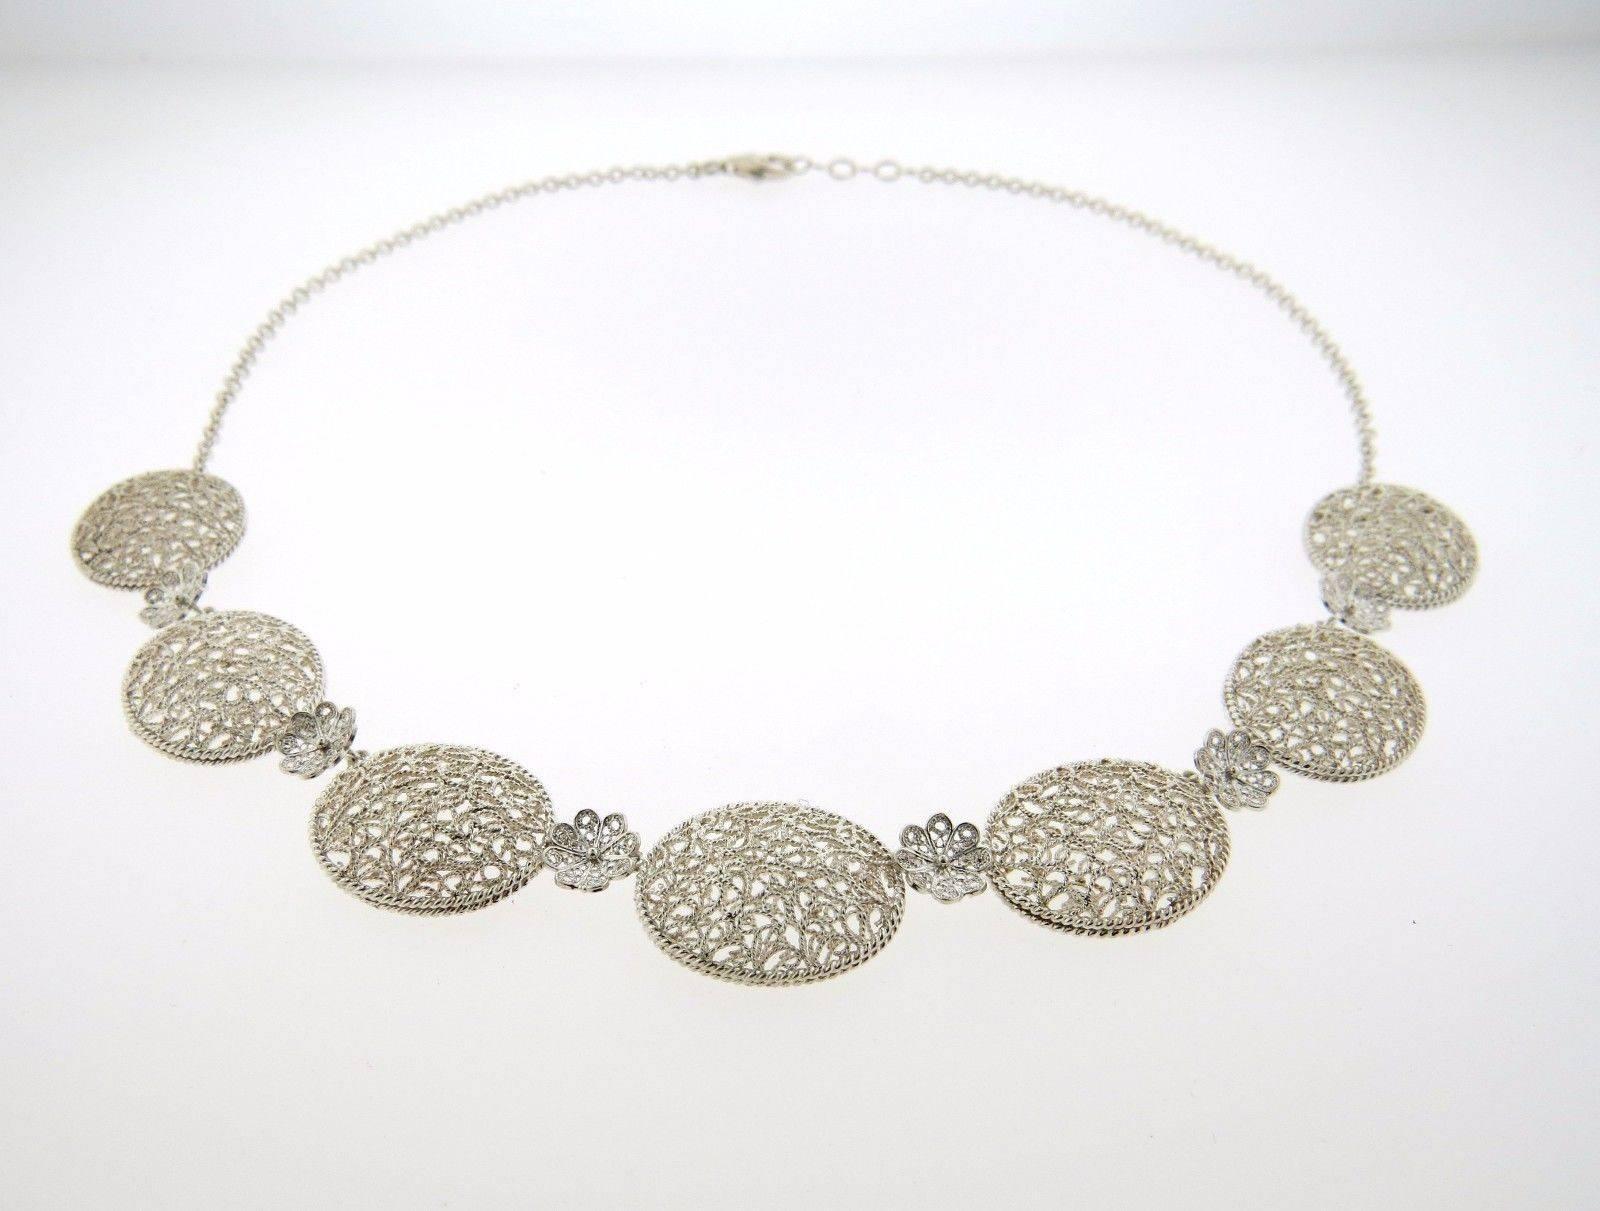 A sterling silver necklace by Buccellati.  The necklace measures 18